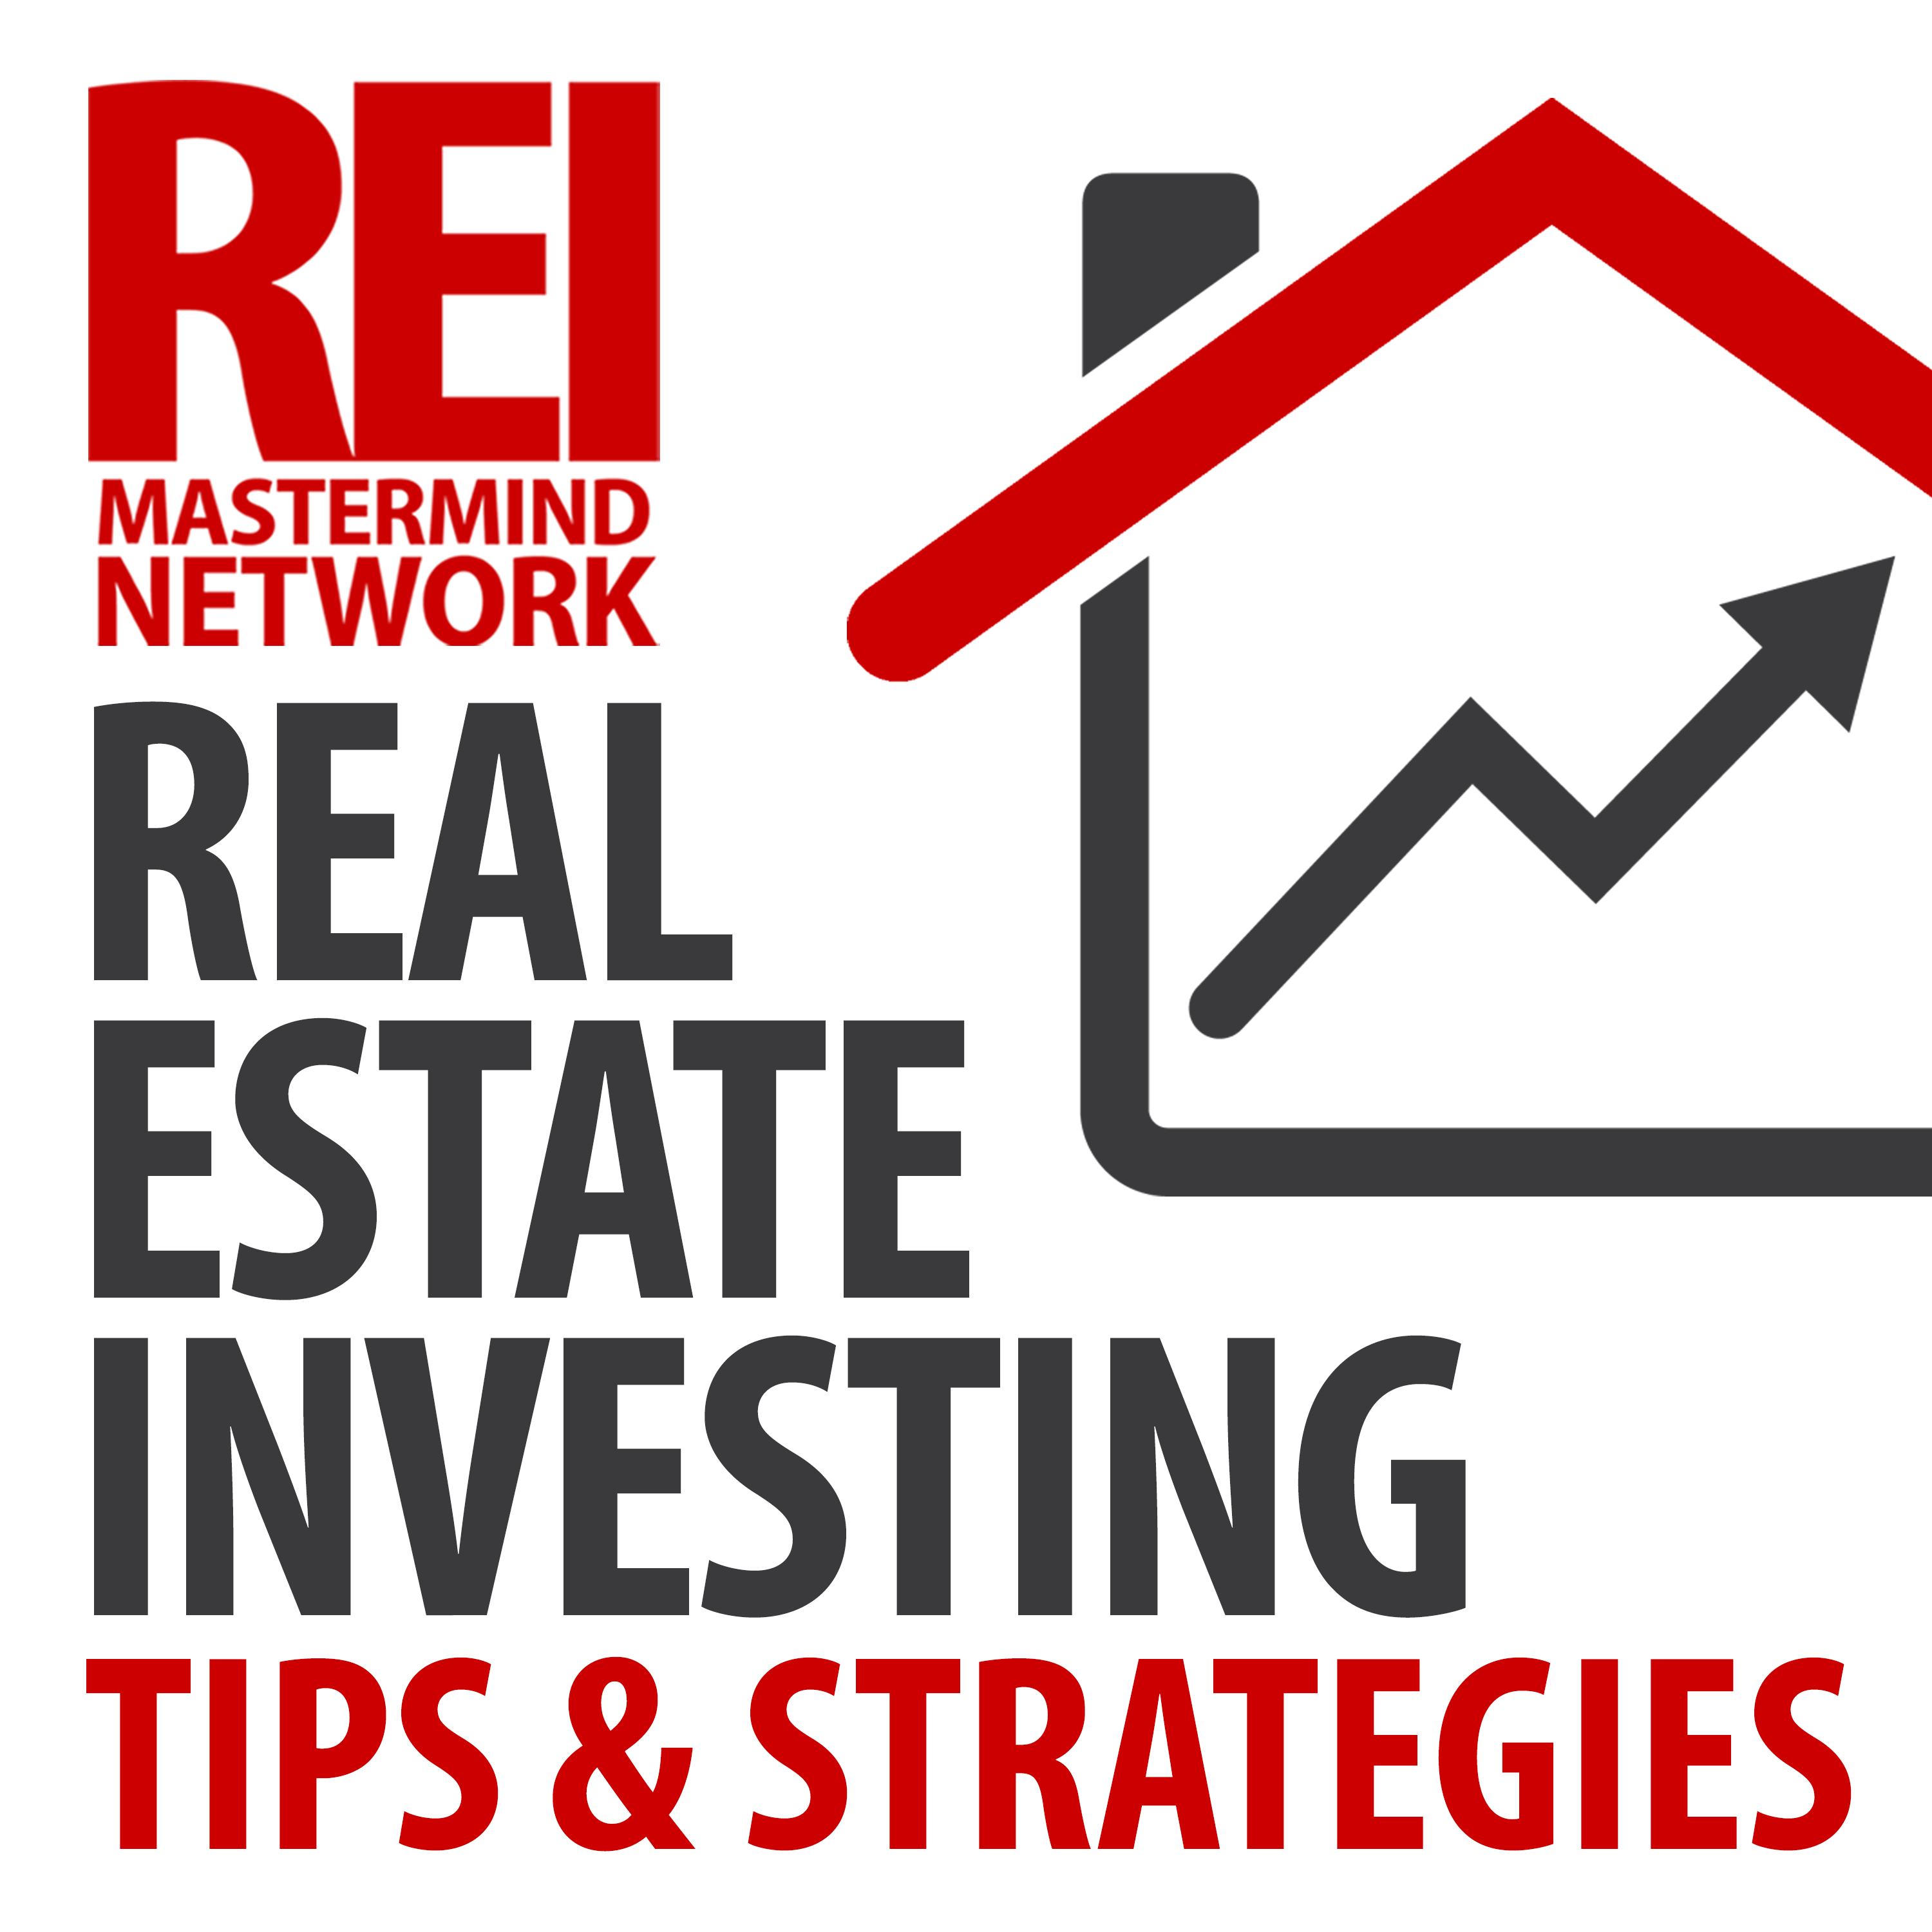 The Top 2 Books to Get Started in Real Estate Investing